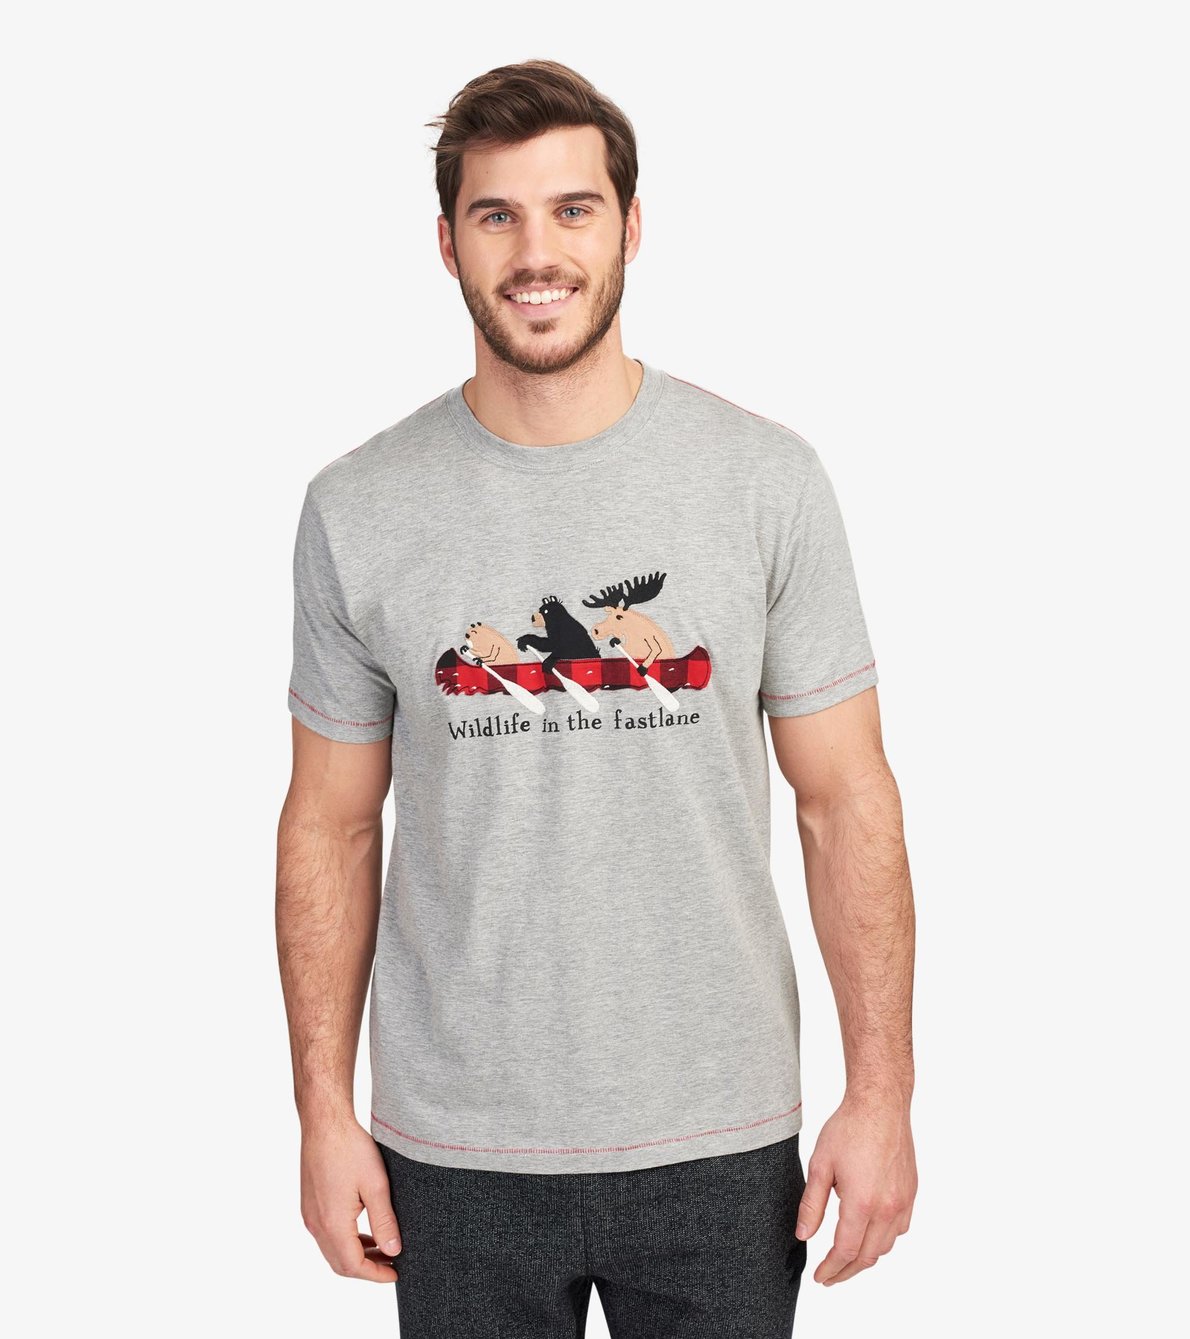 View larger image of Wildlife in the Fastlane Men's Tee